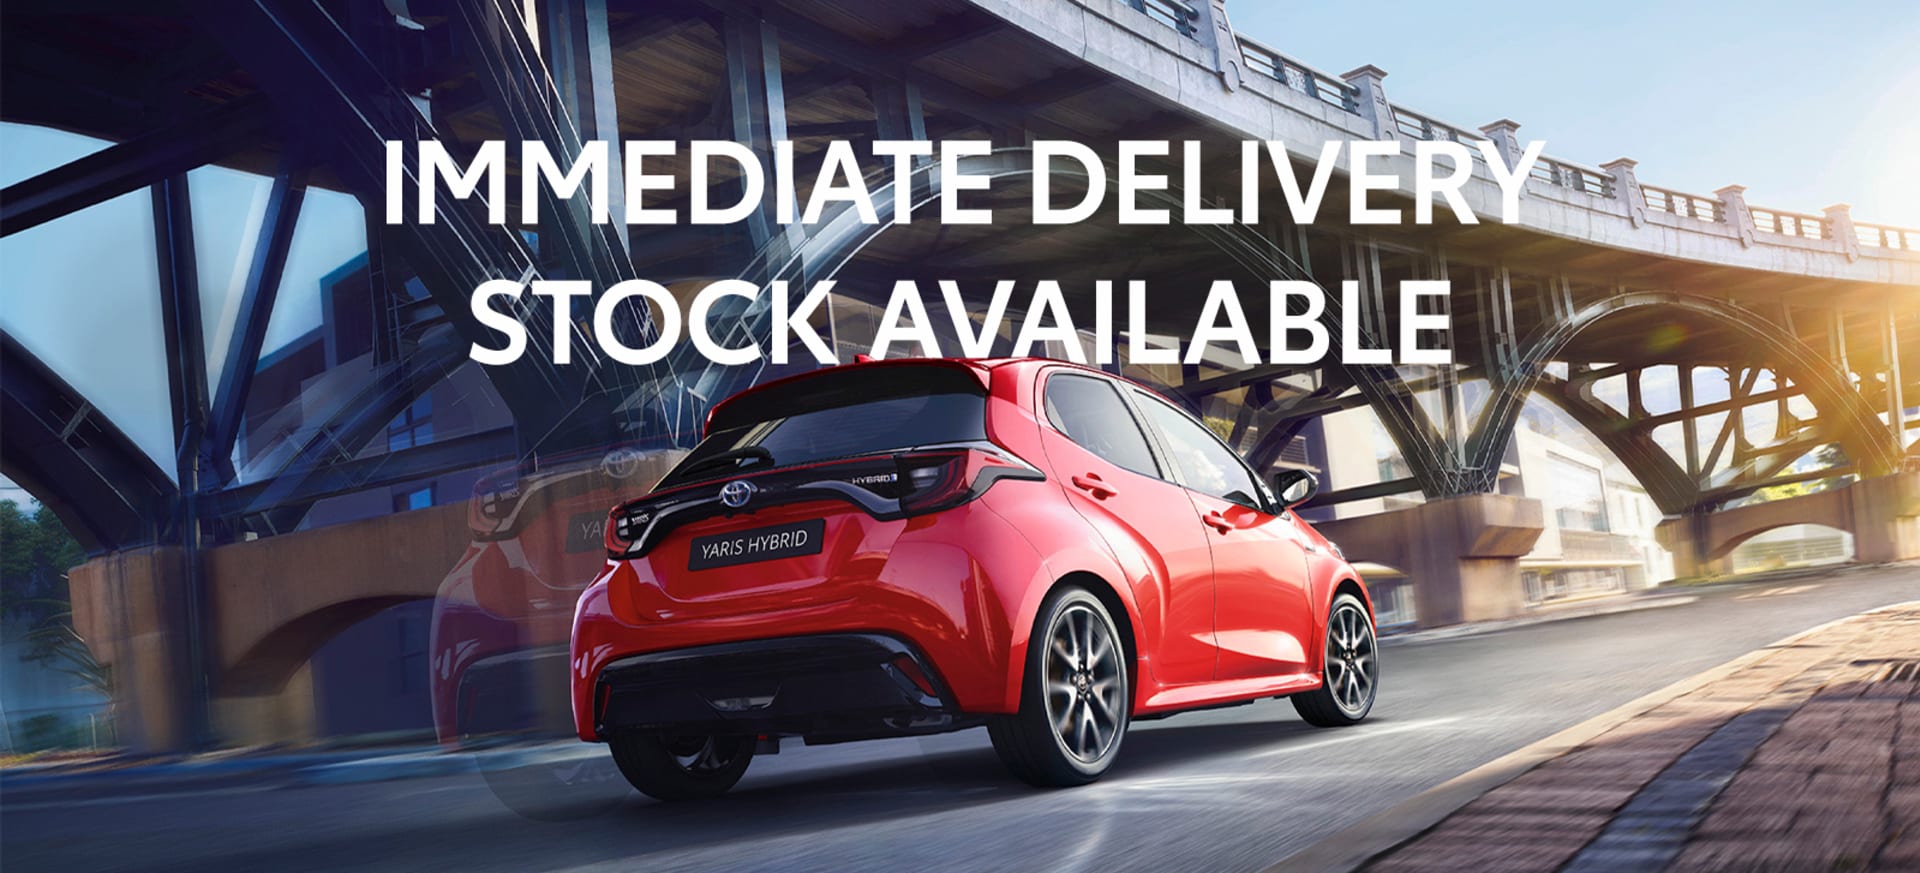 Brand new Toyota stock available for delivery 